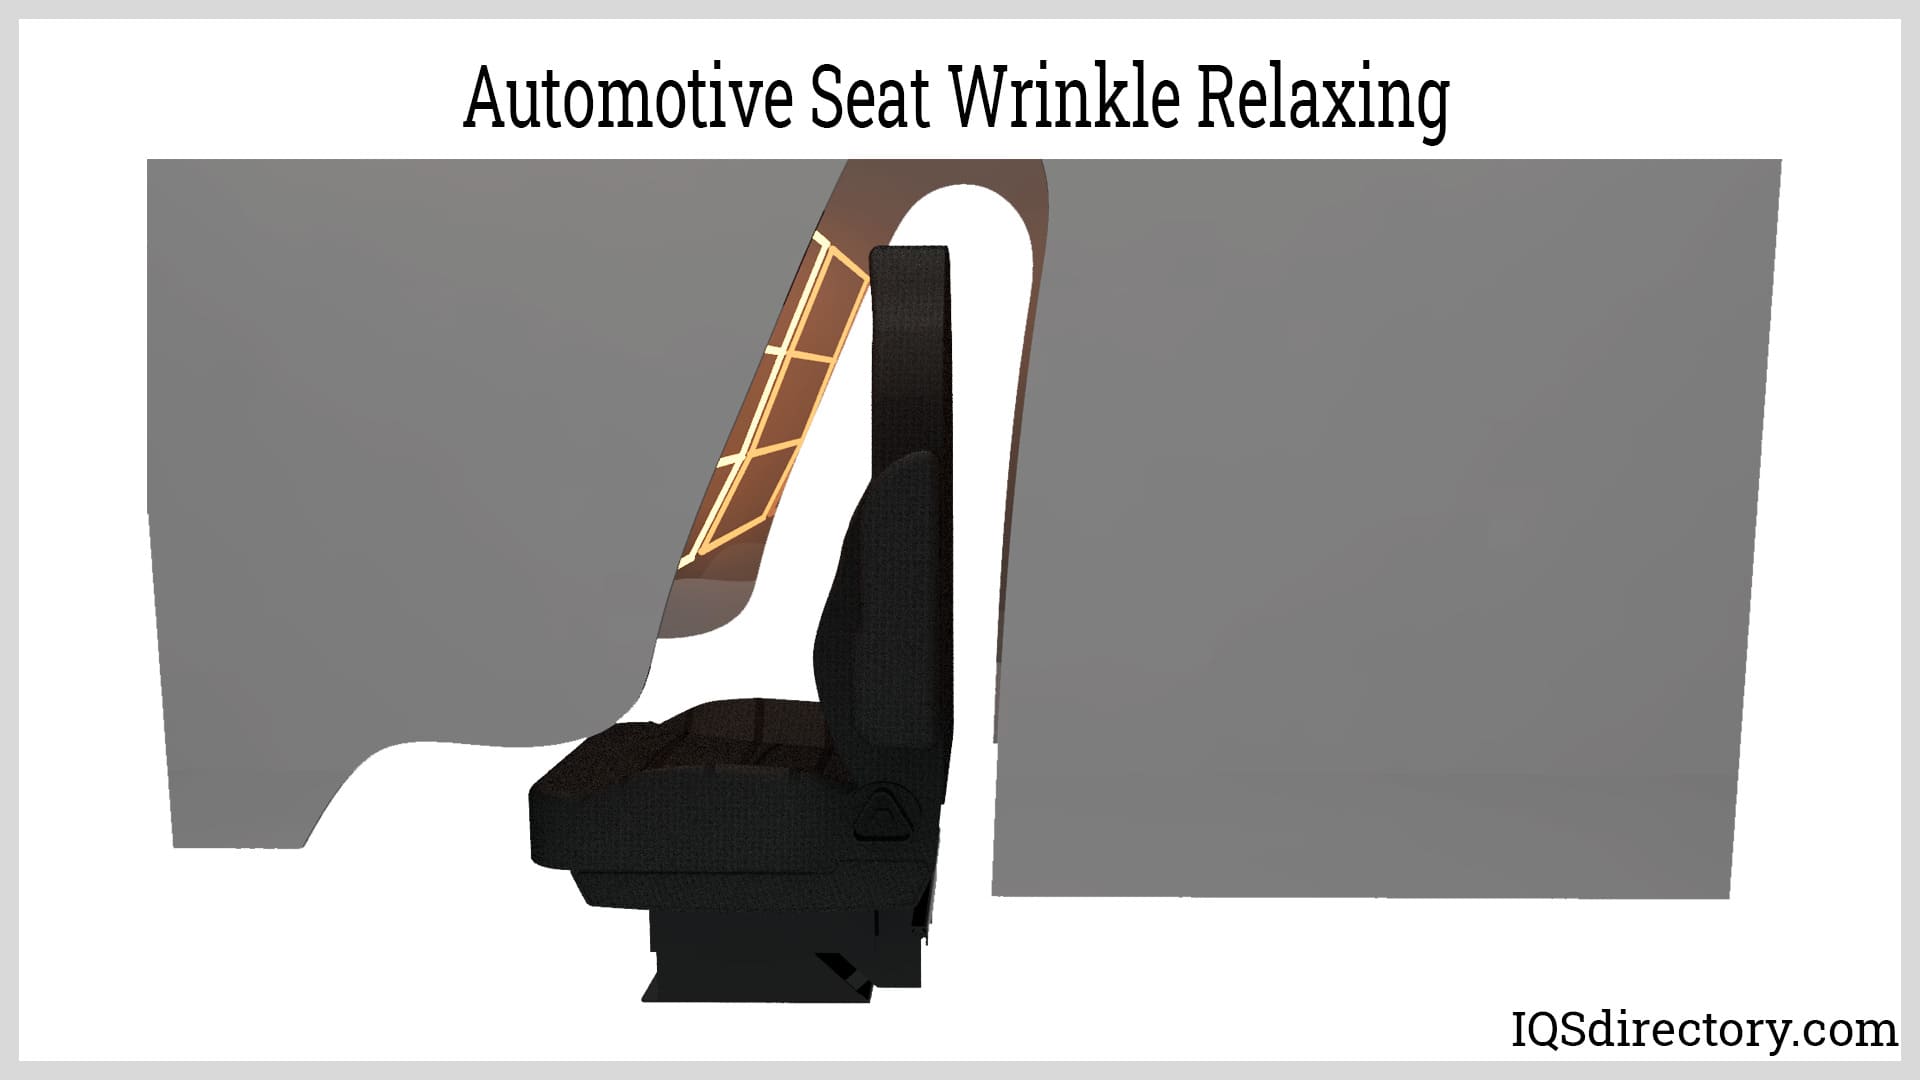 Automotive Seat Wrinkle Relaxing